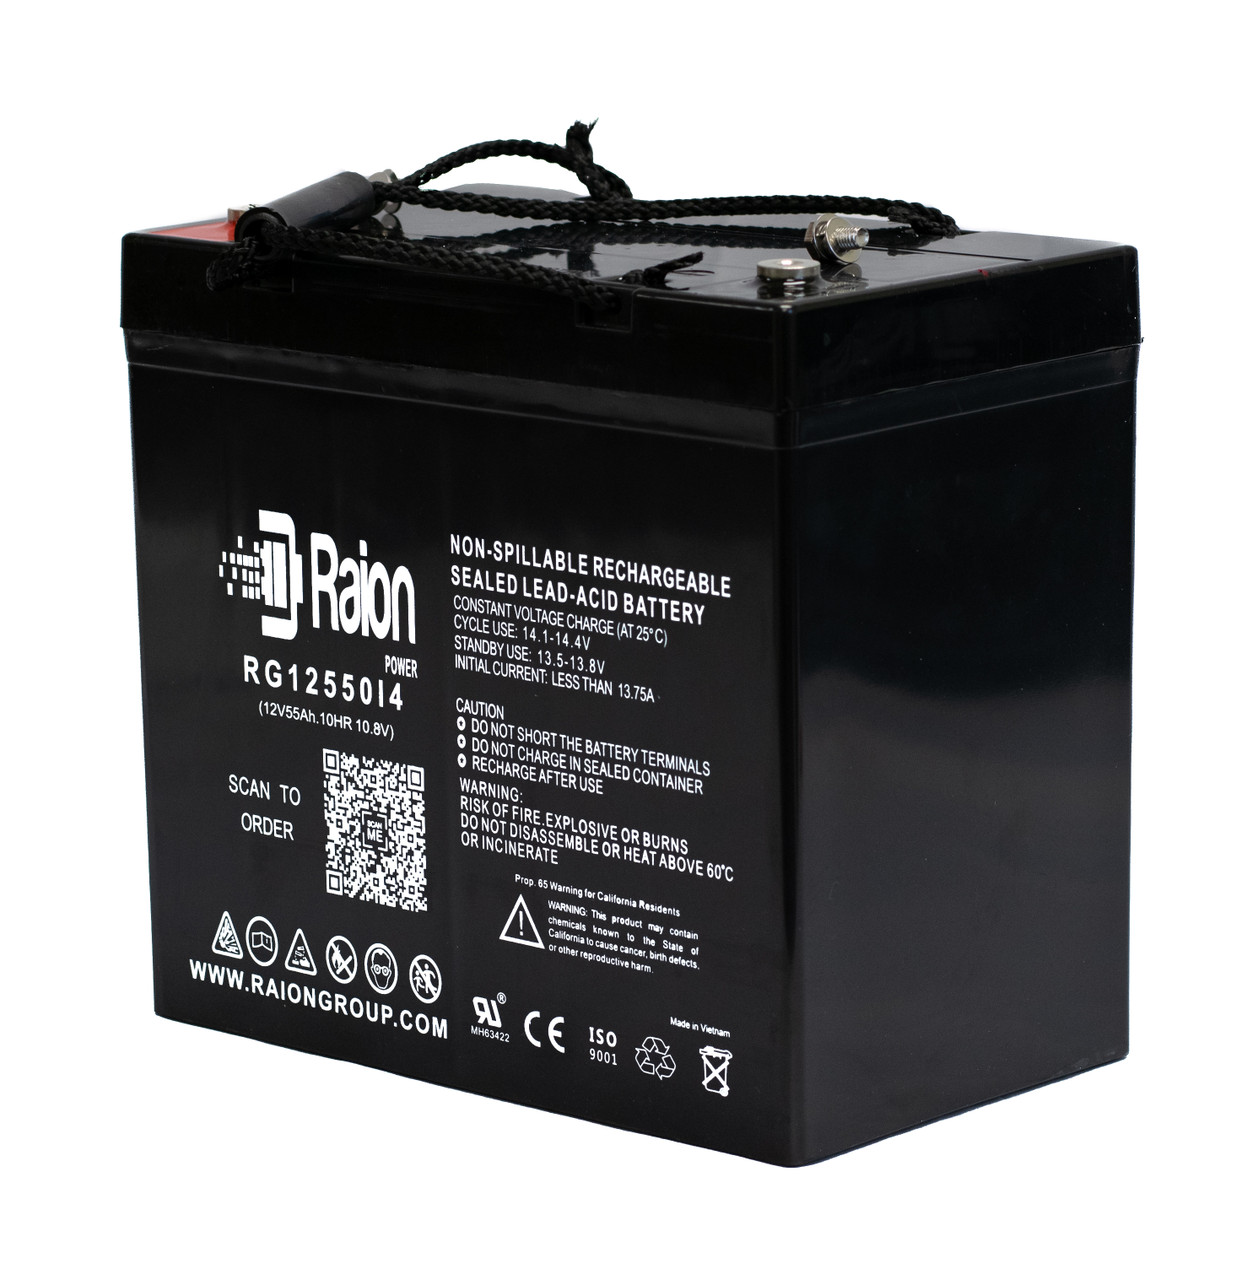 Raion Power Replacement 12V 55Ah Battery for Cellpower CPC 55-12 - 1 Pack